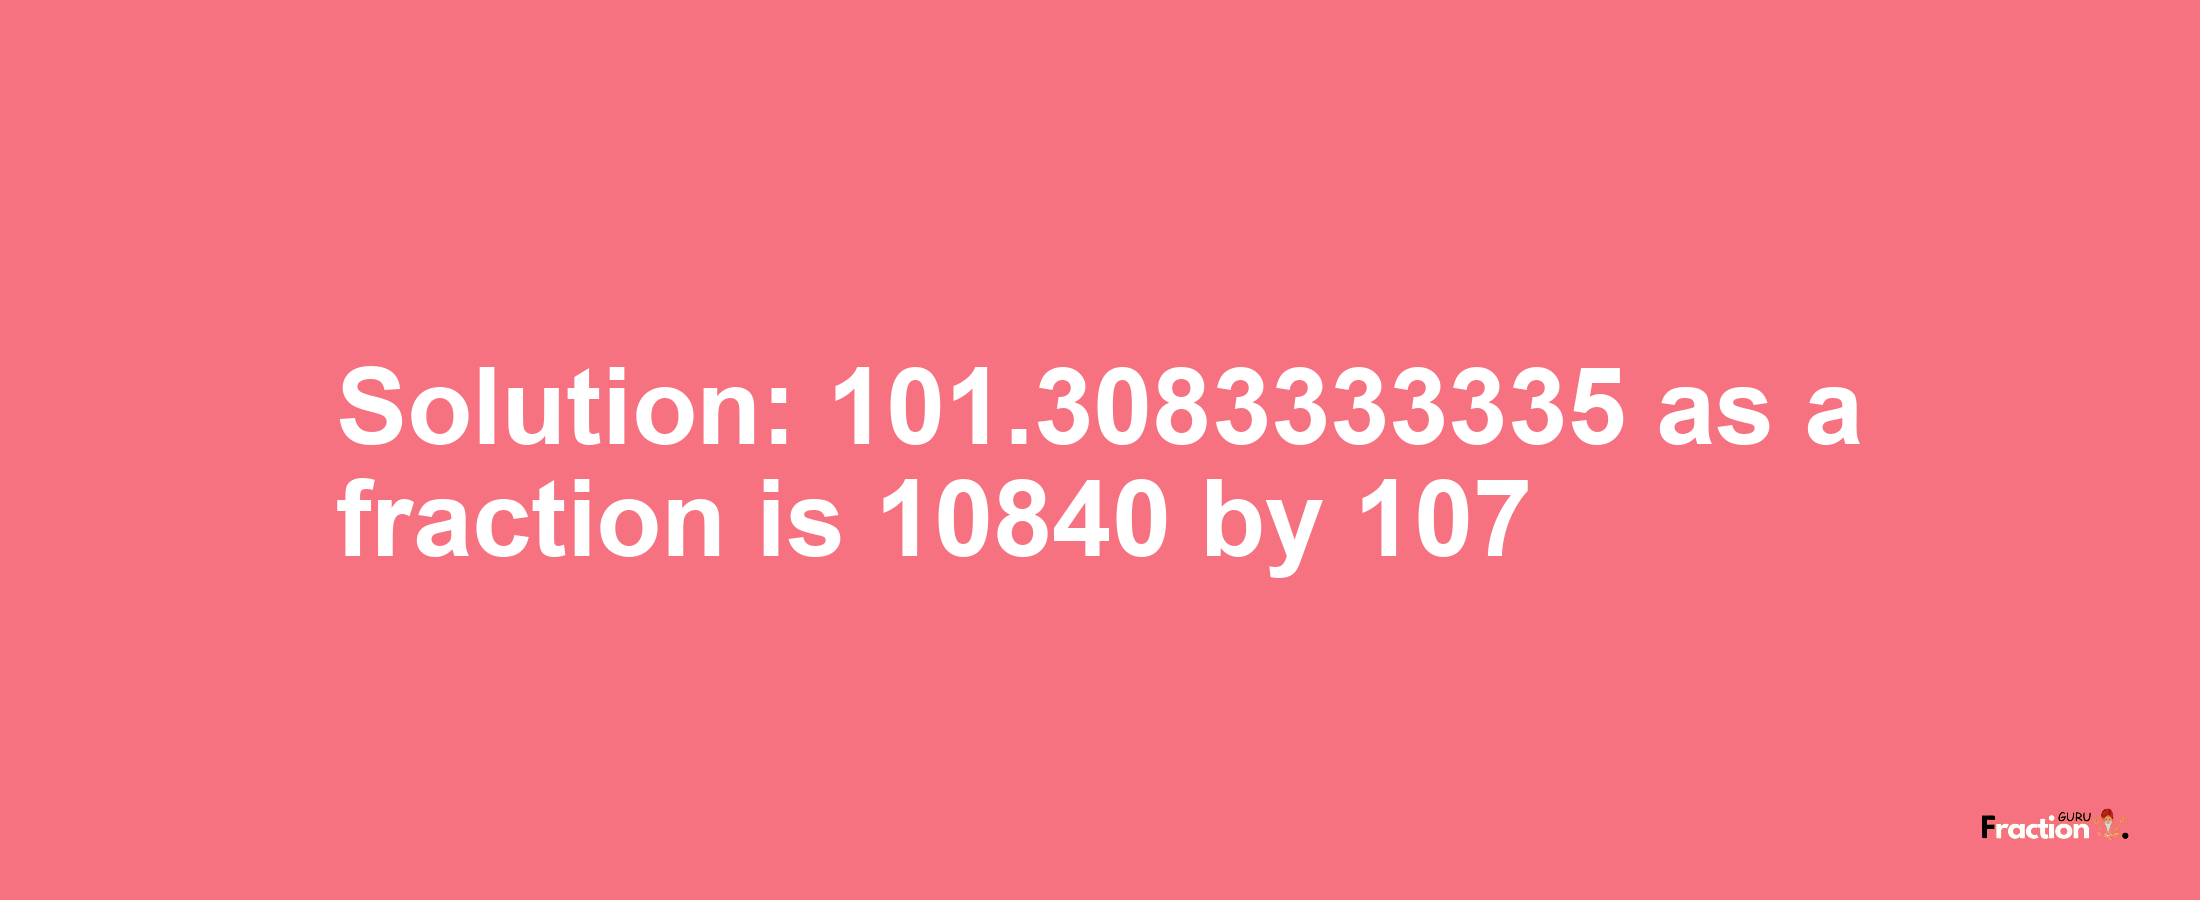 Solution:101.3083333335 as a fraction is 10840/107